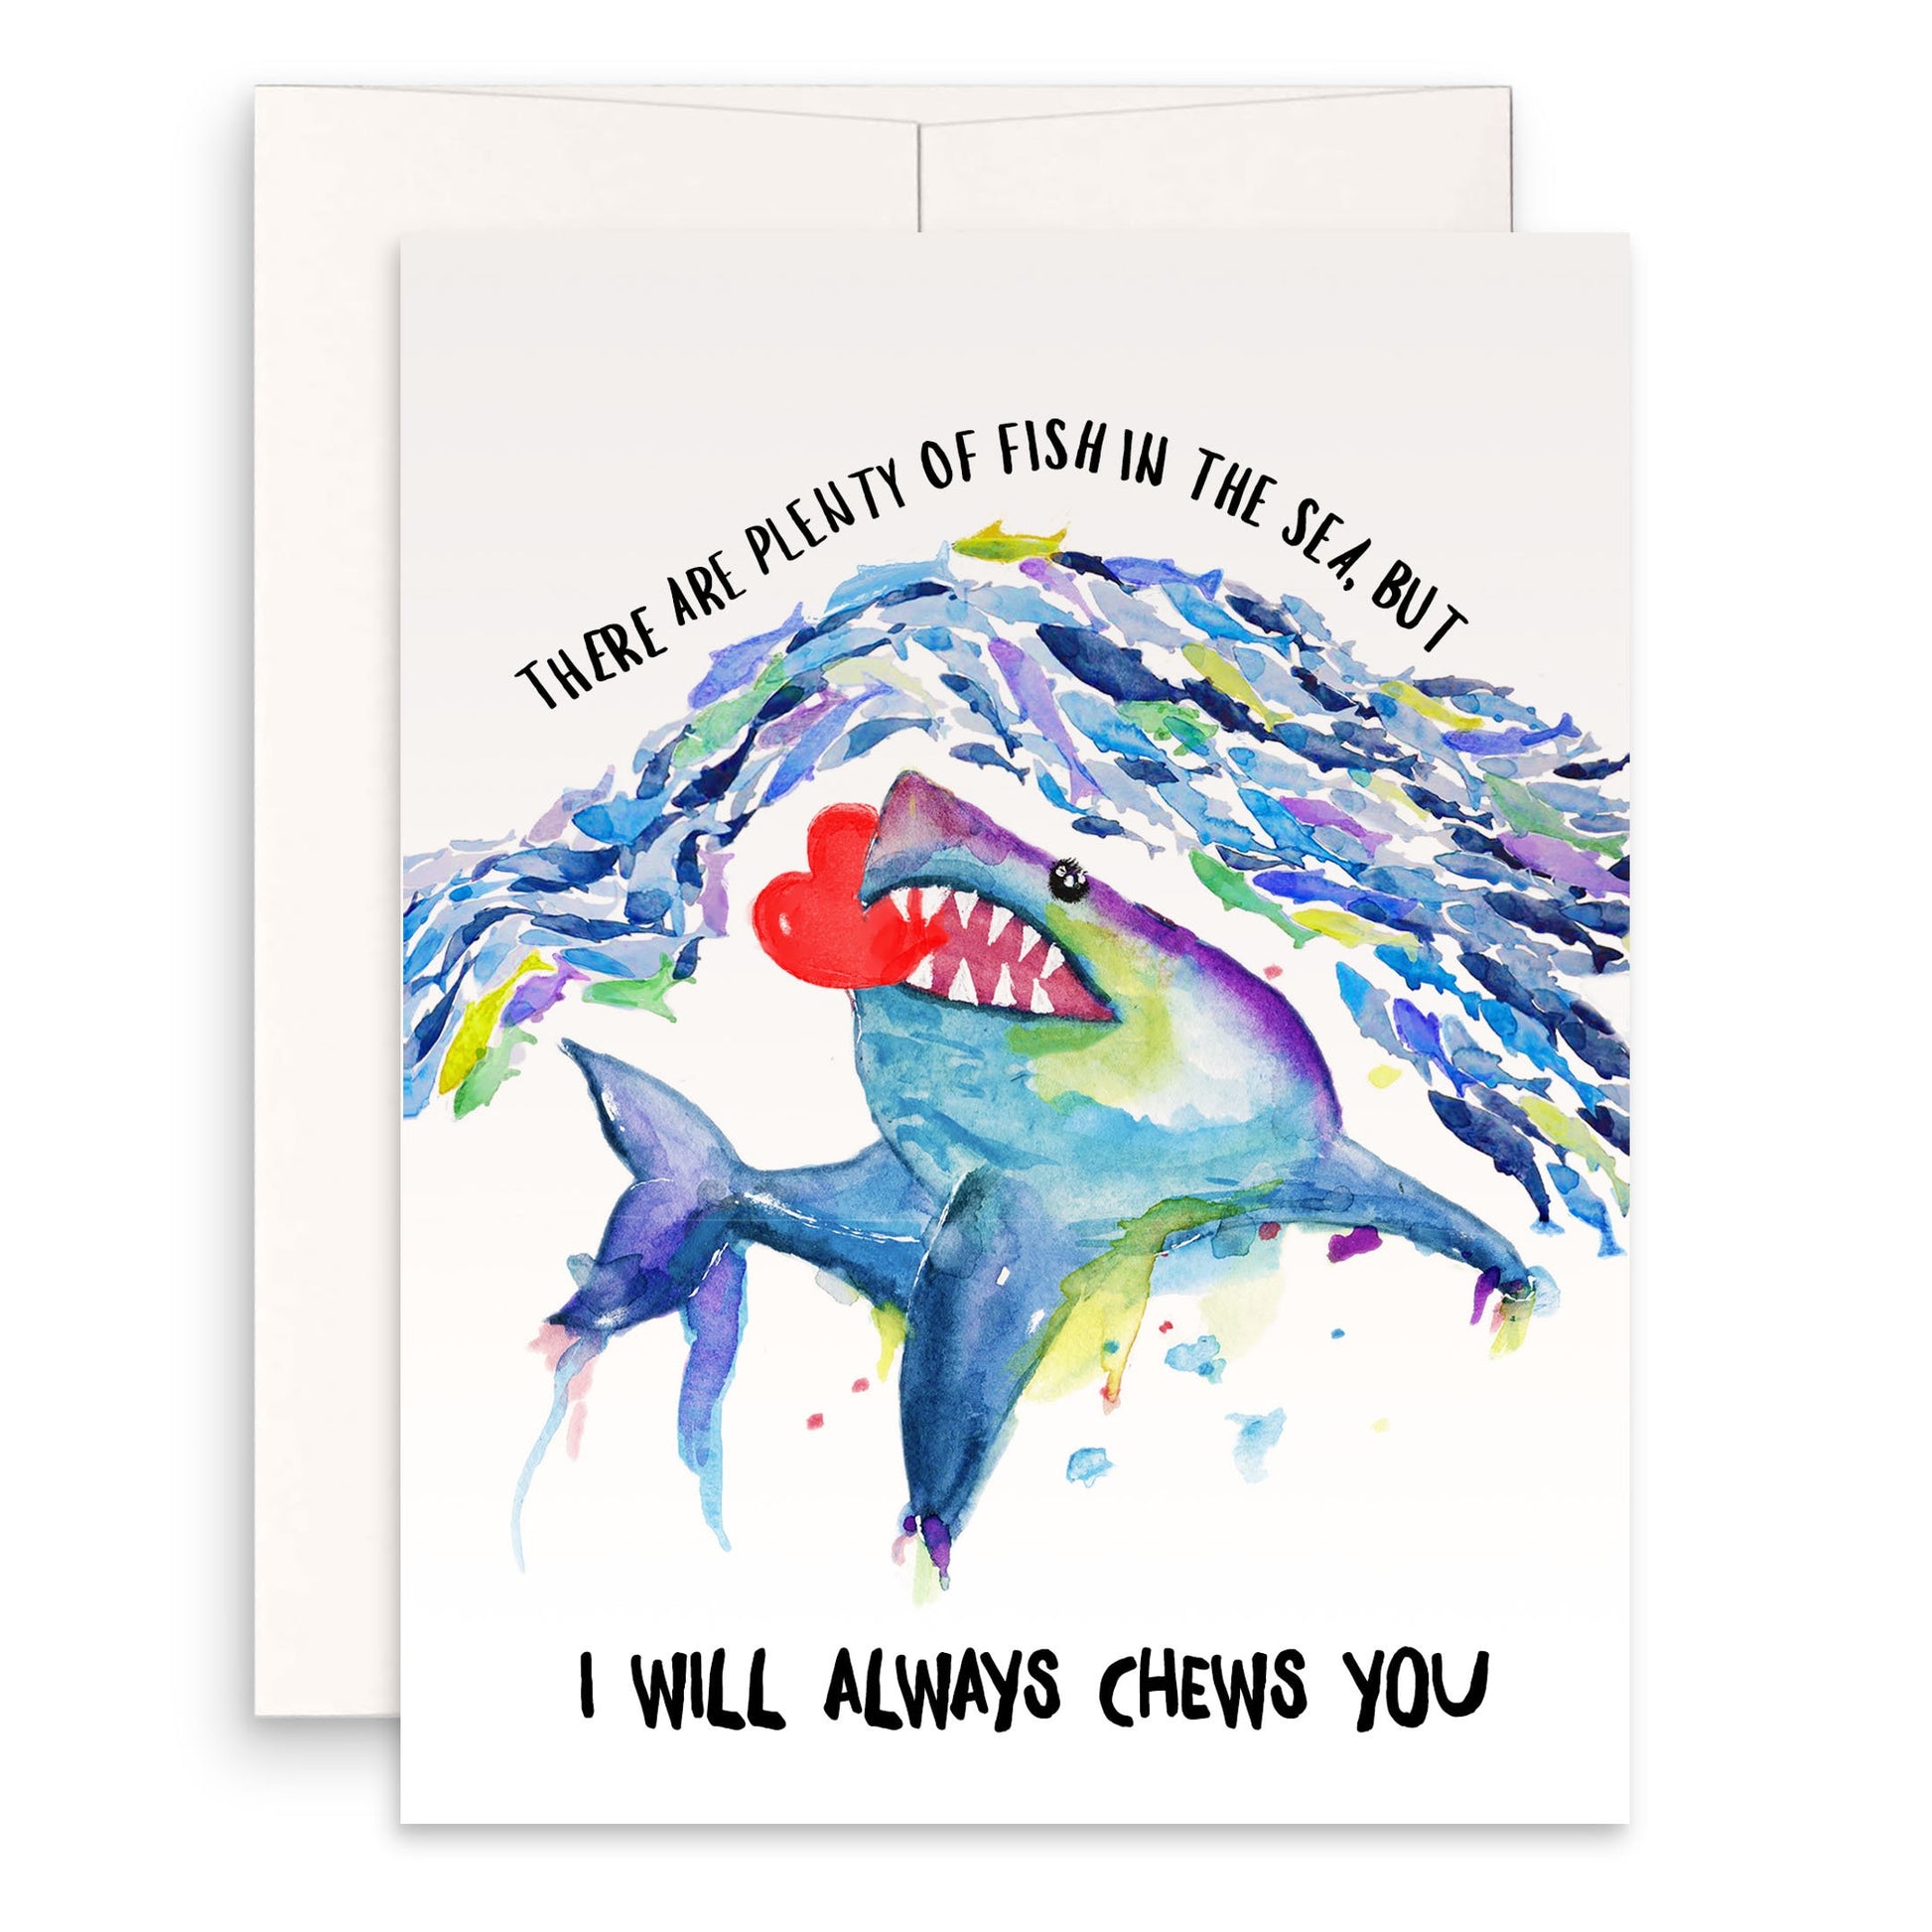 Funny Shark Valentines Card For Him - I Choose You Funny Love Card For Husband - Watercolor Handmade Card By Liyana Studio